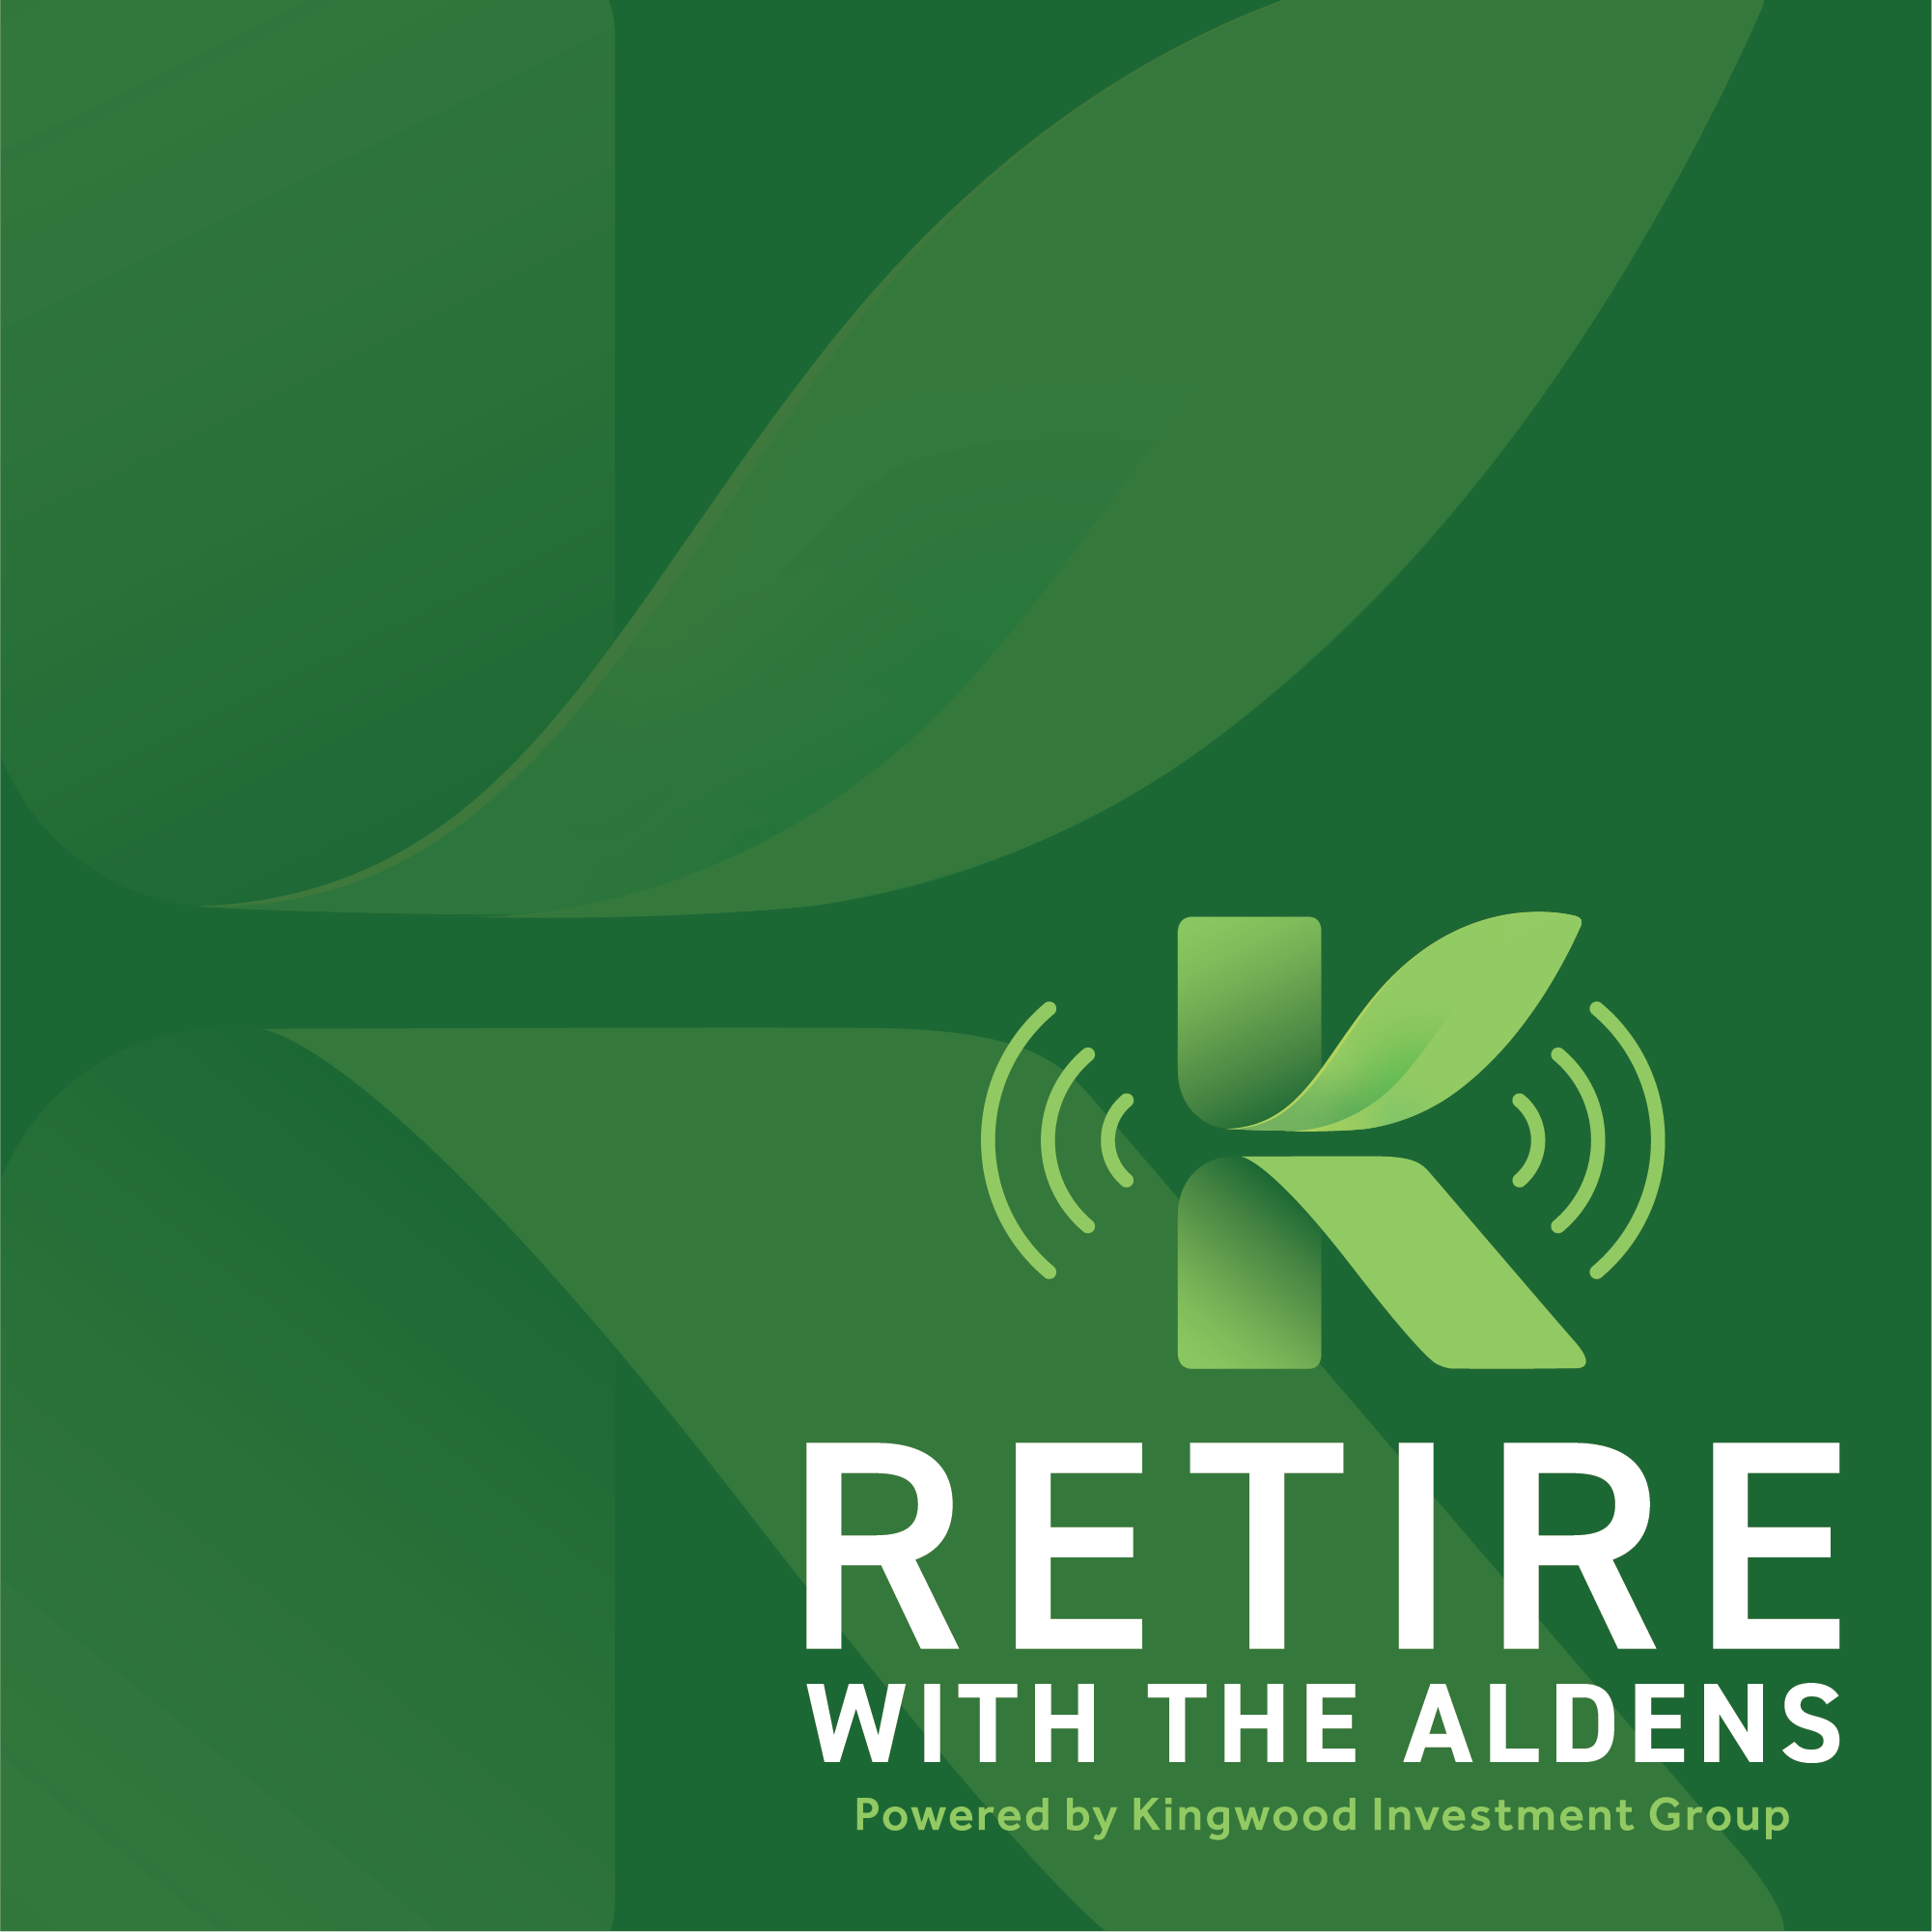 Protecting principle income in retirement